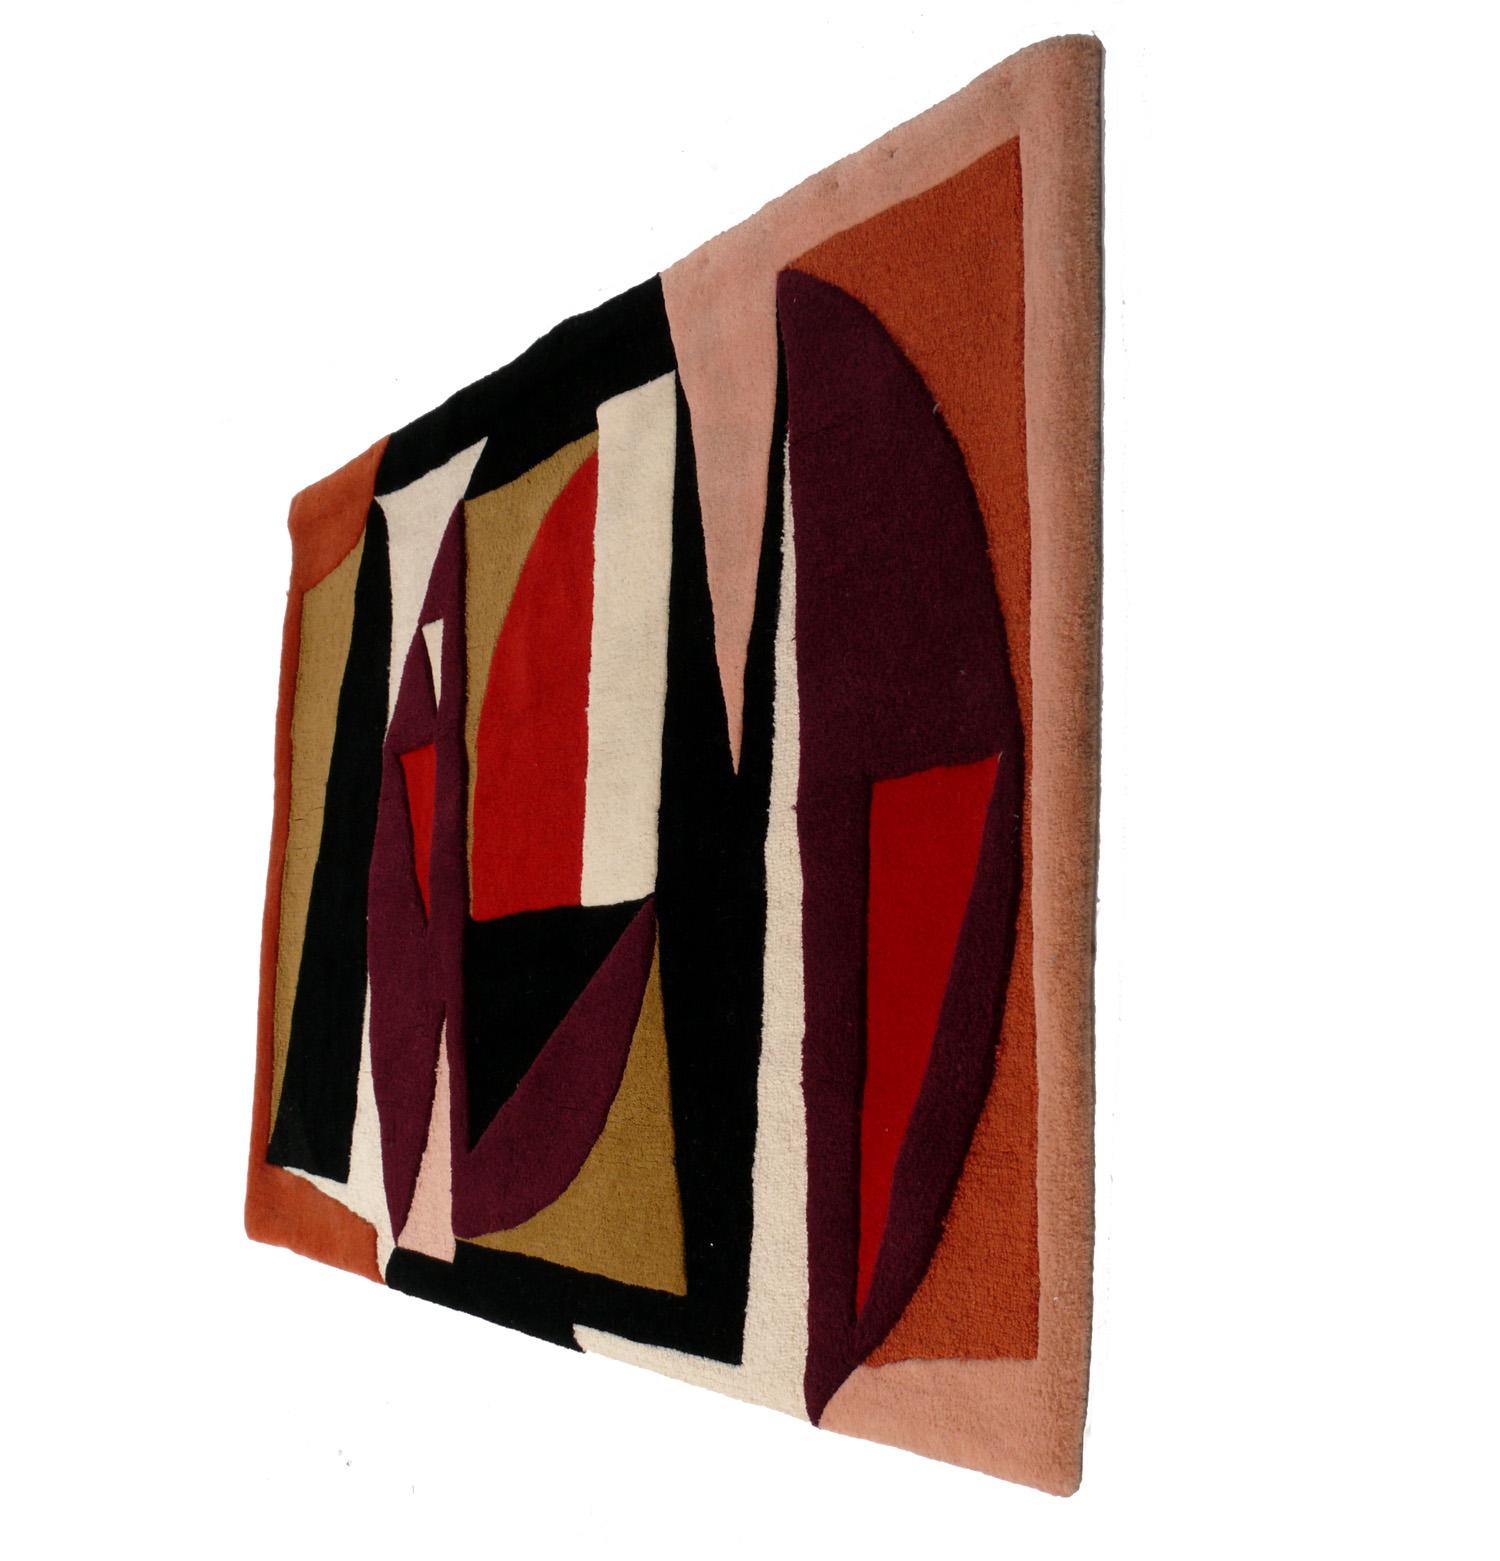 Colorful Modernist wool tapestry, after the Camocyn series of paintings that Victor Vasarely executed in the late 1940s - early 1950s. It measures an impressive 6 feet wide x 4 feet height. This tapestry is probably European, circa late 1950s -